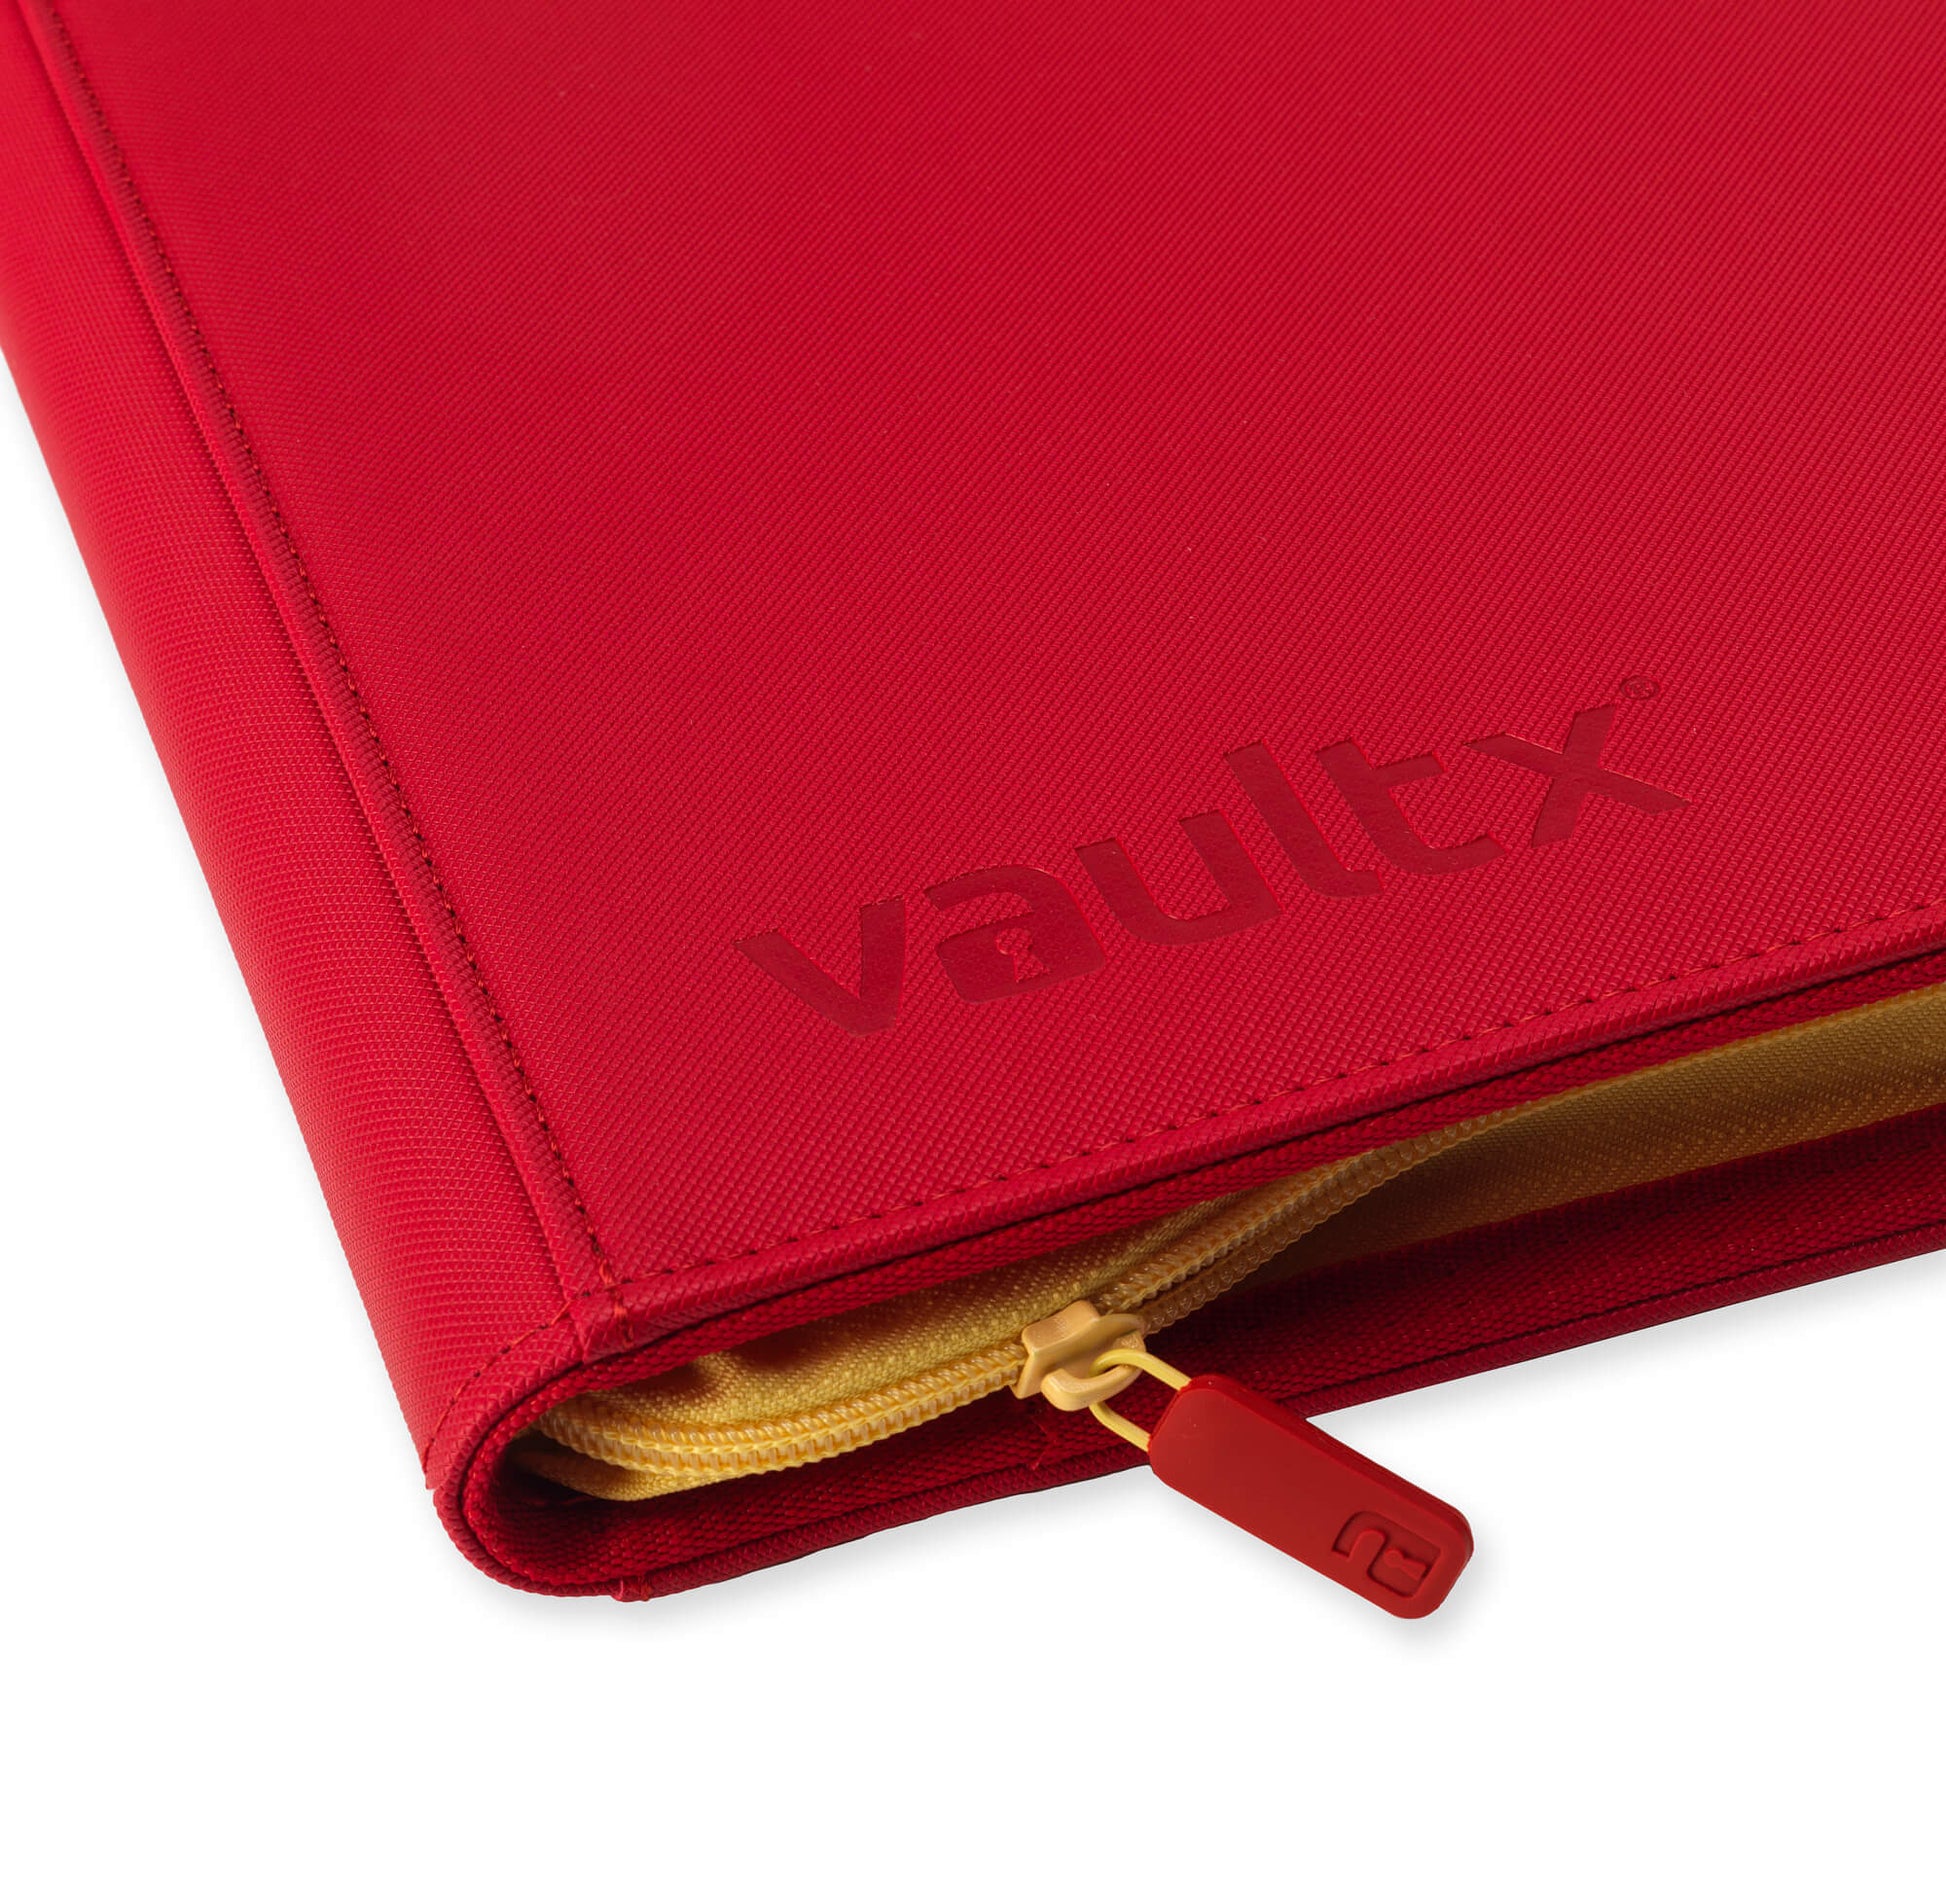 Vault X - SWSH9 Brilliant Stars Exclusive Binder now available to